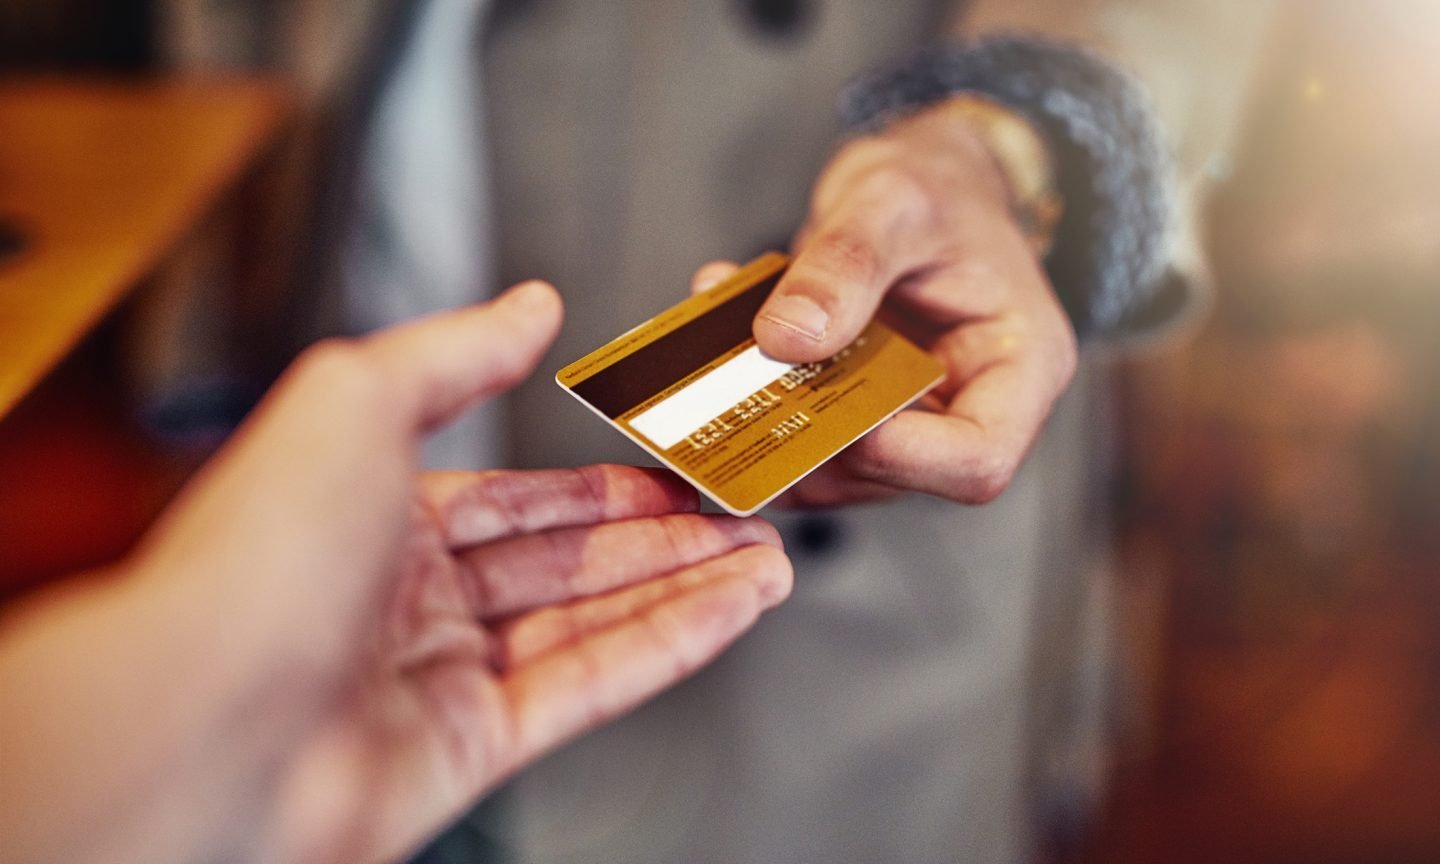 Get Your Wallet Dressed to Impress With These Top Metal Credit Cards